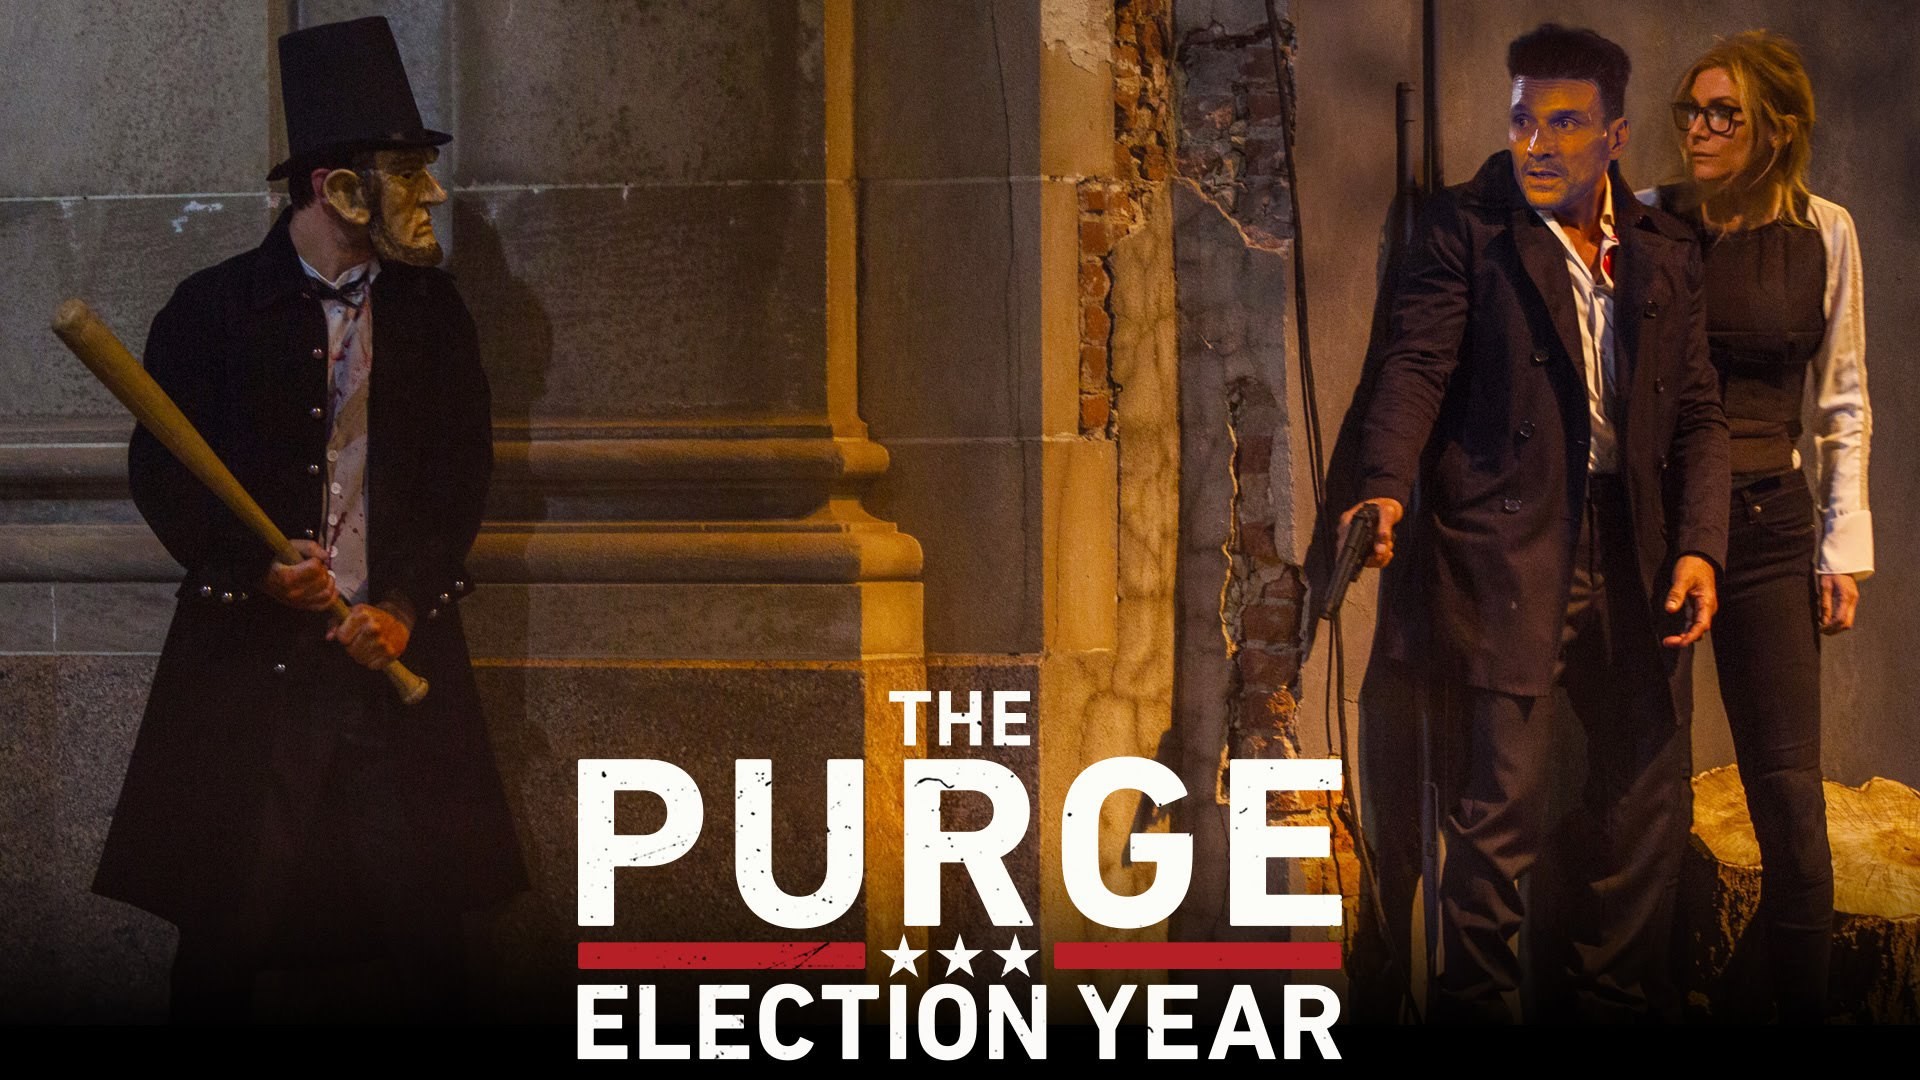 1920x1080 The Purge Election Year Wallapeper